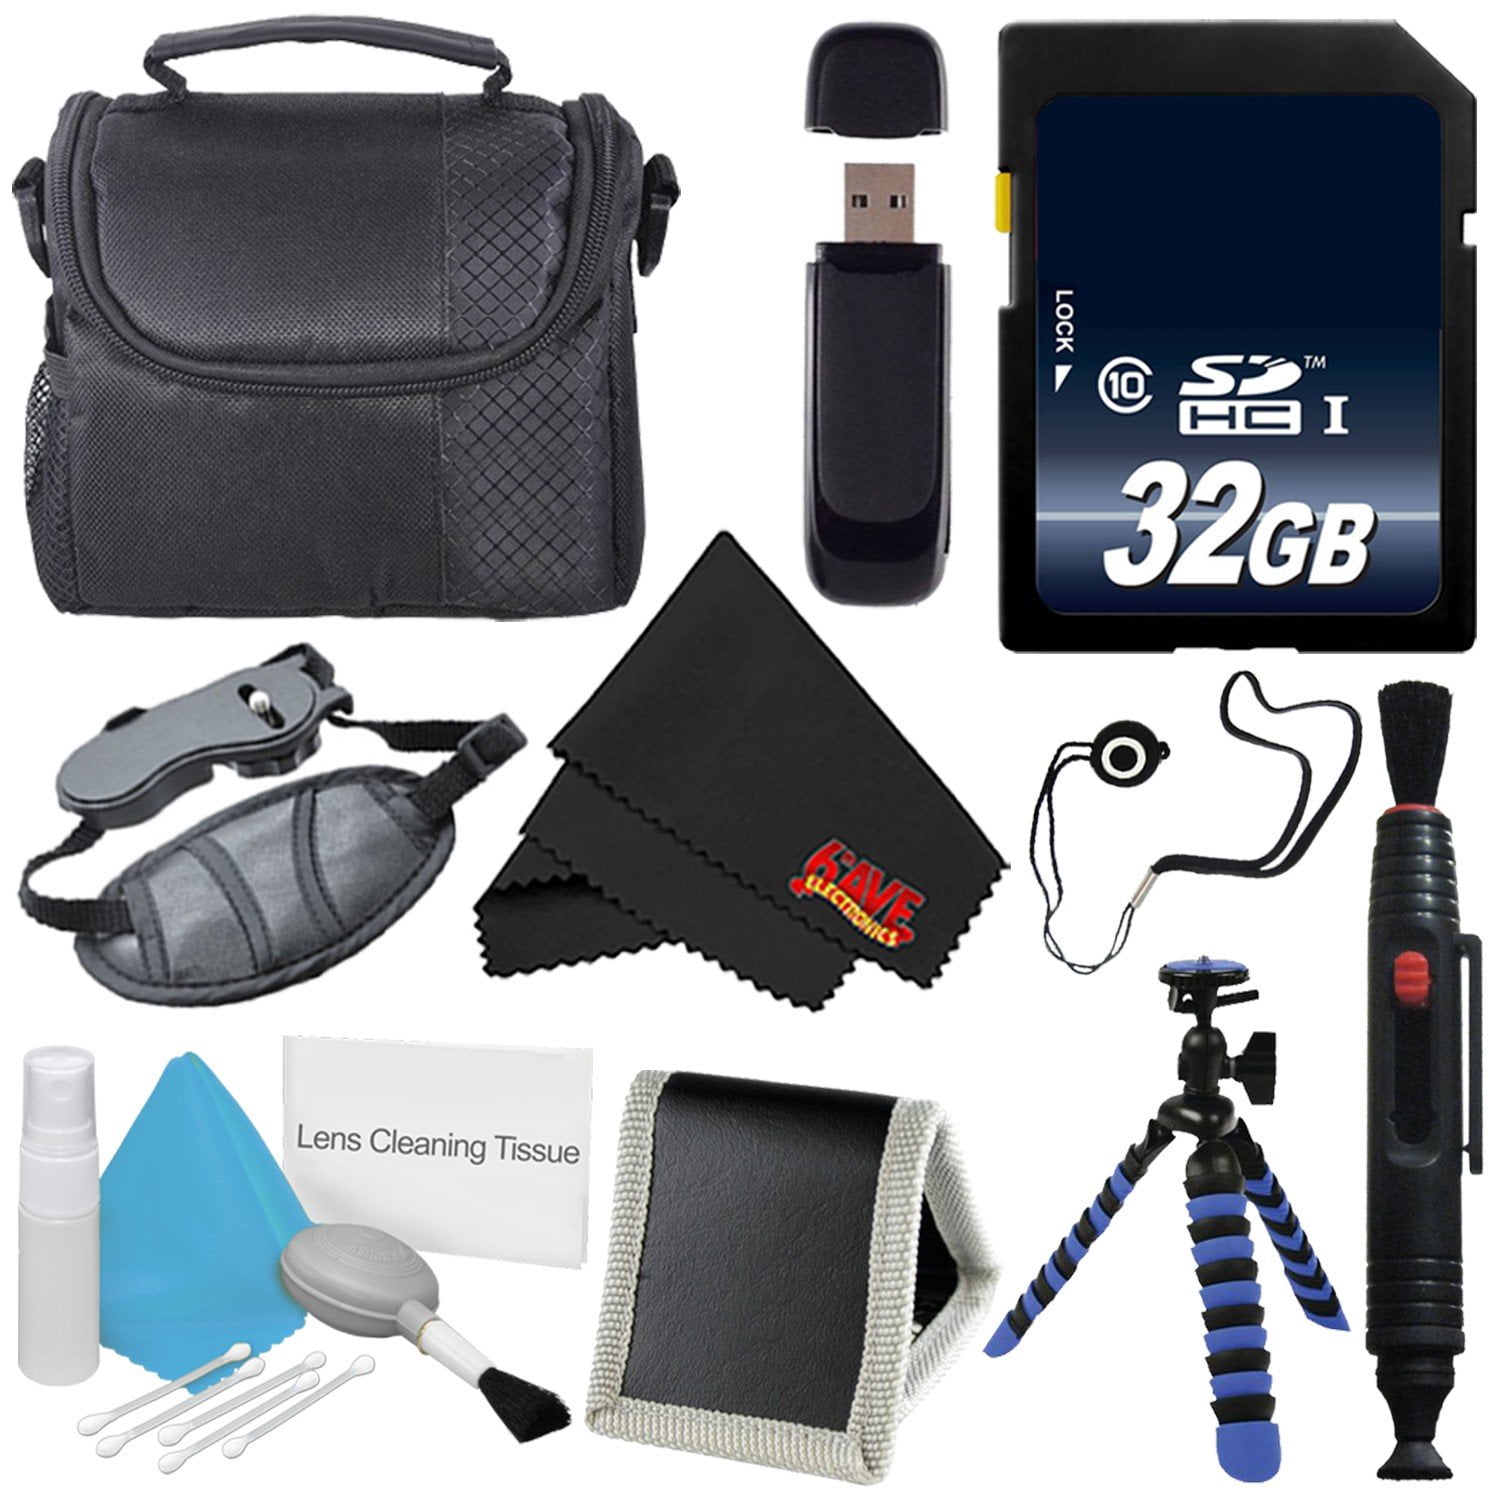 Accessory Kit for Coolpix B500,B700, Sandisk 32GB ULTRA Memory Card + Camera Case + MORE - Walmart.com